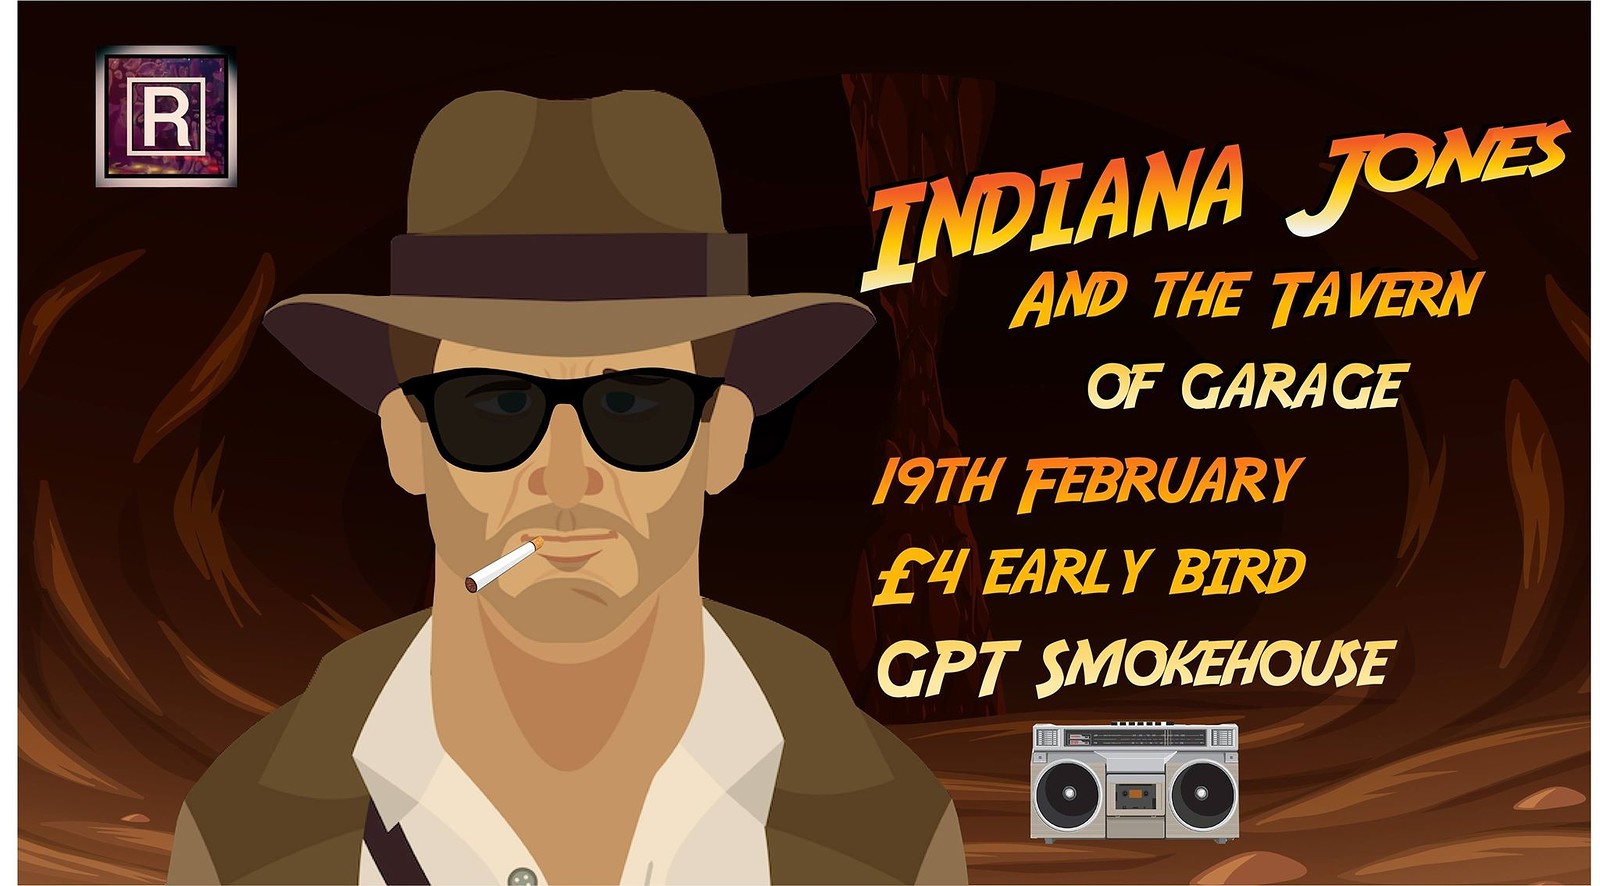 Indiana Jones and the Tavern of Garage at GPT Smokehouse